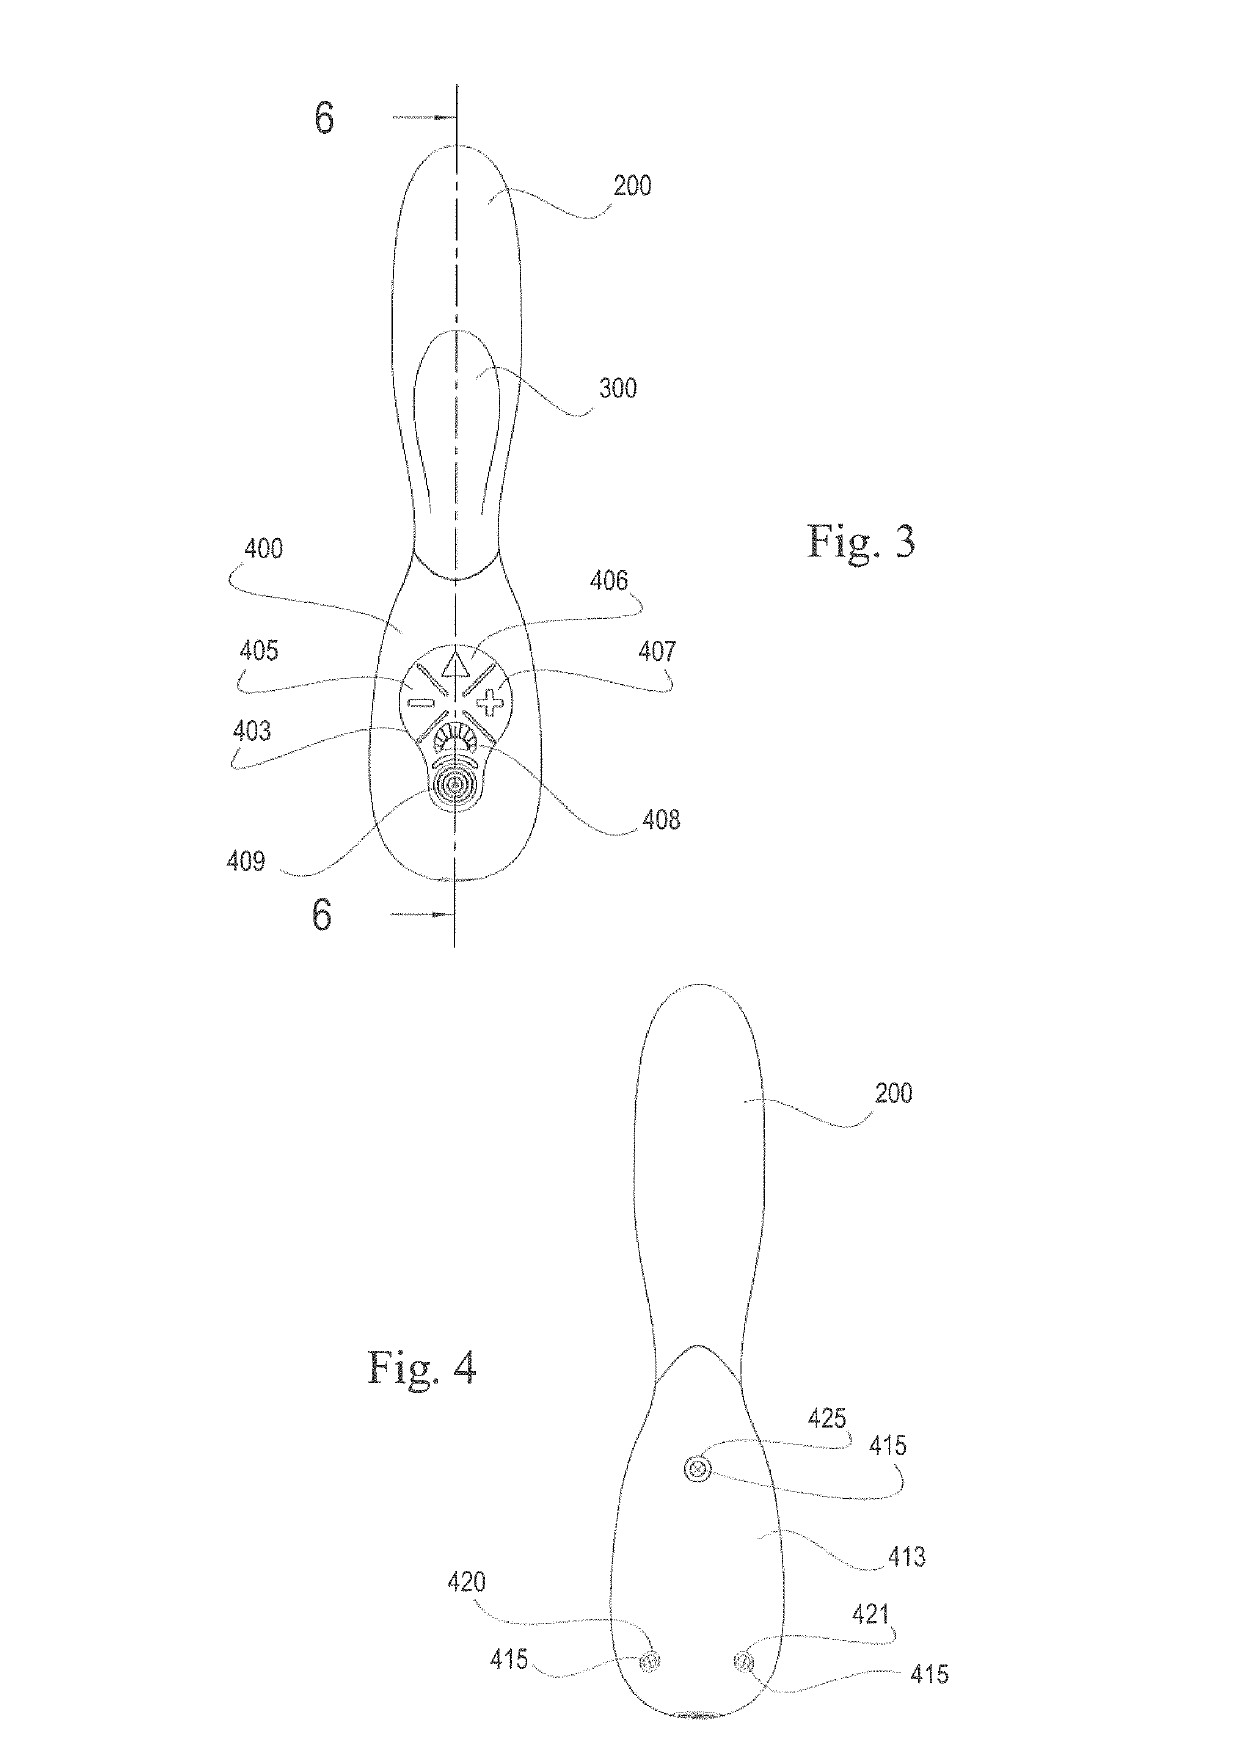 Sexual stimulation device using light therapy, vibration and physiological feedback